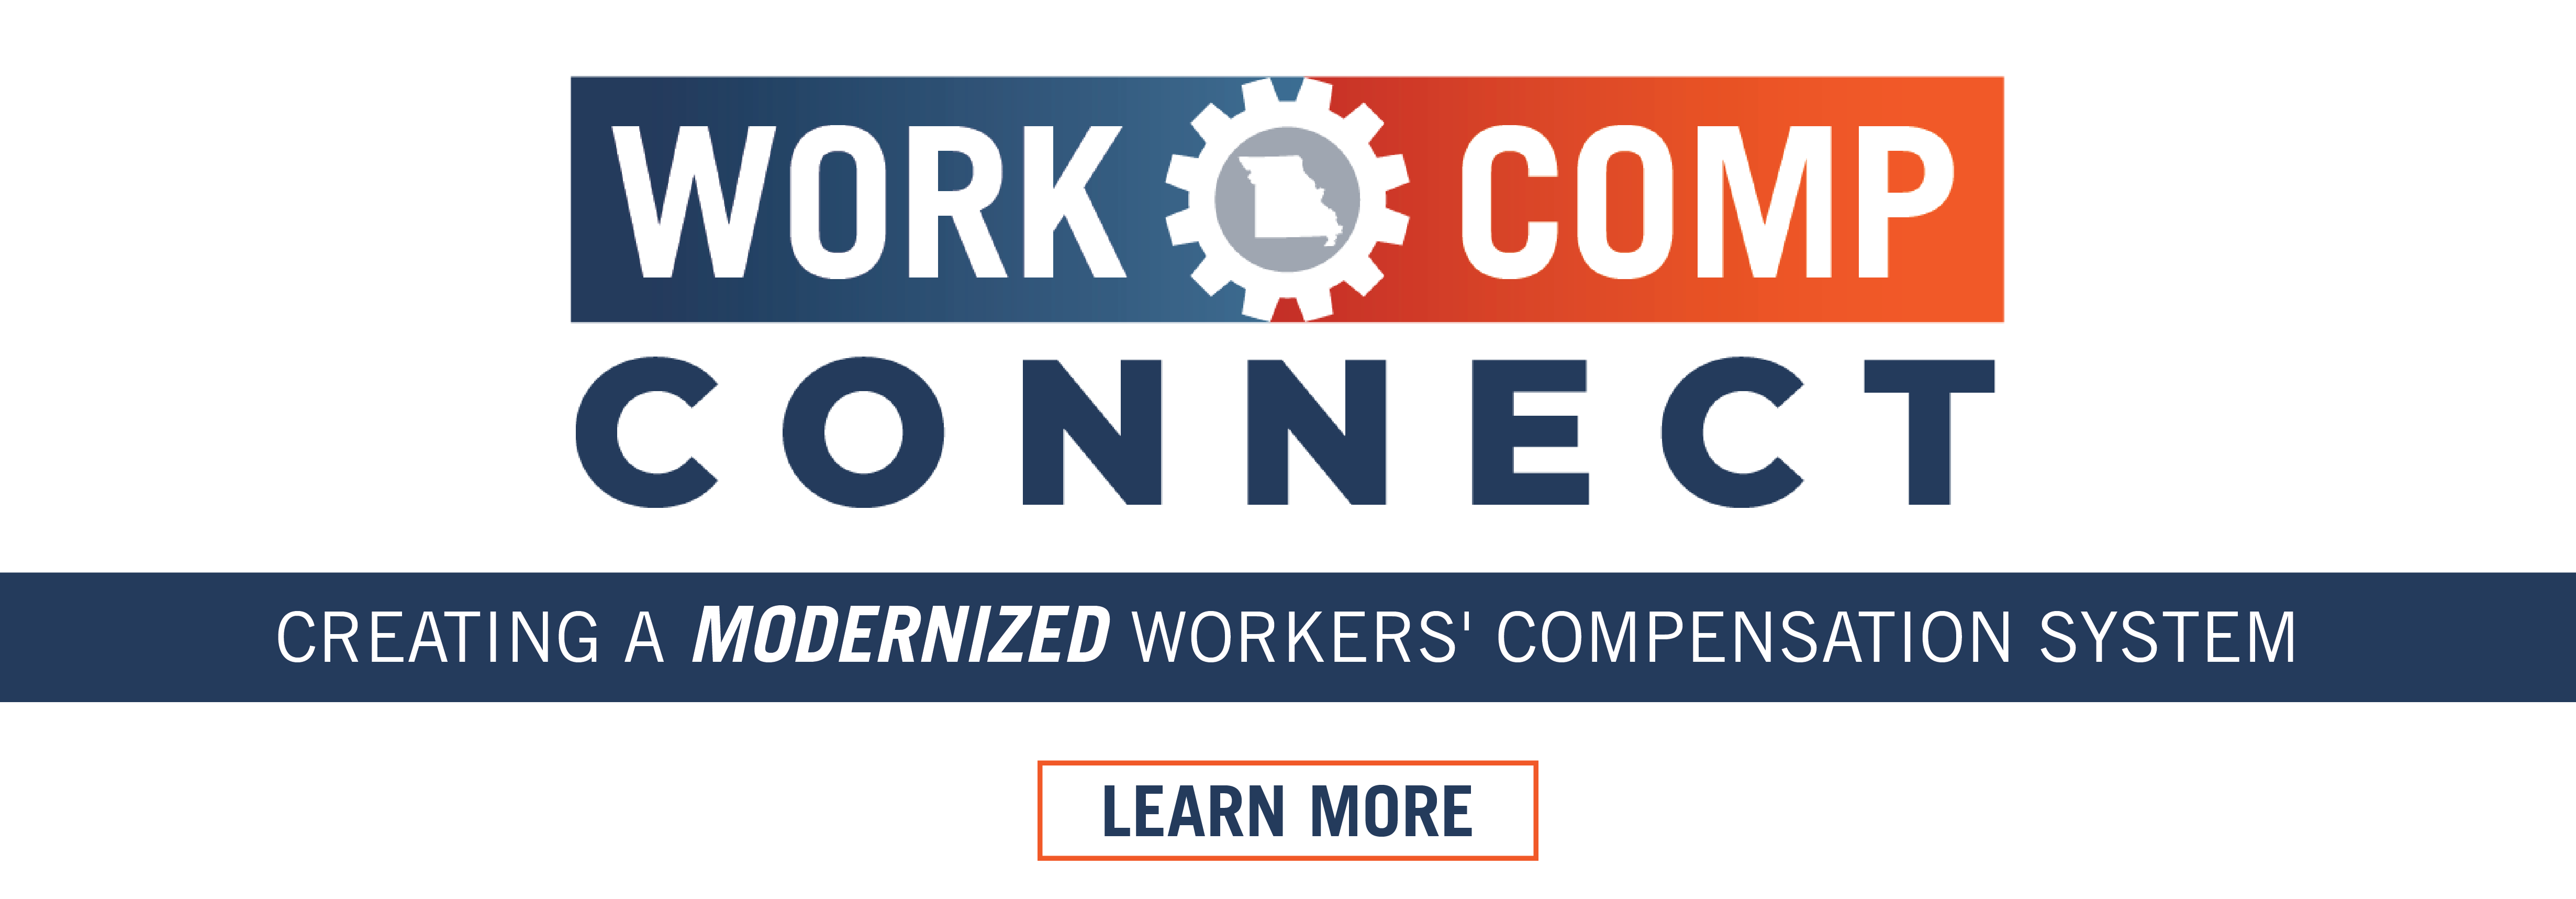 Workers Comp Connect Graphic